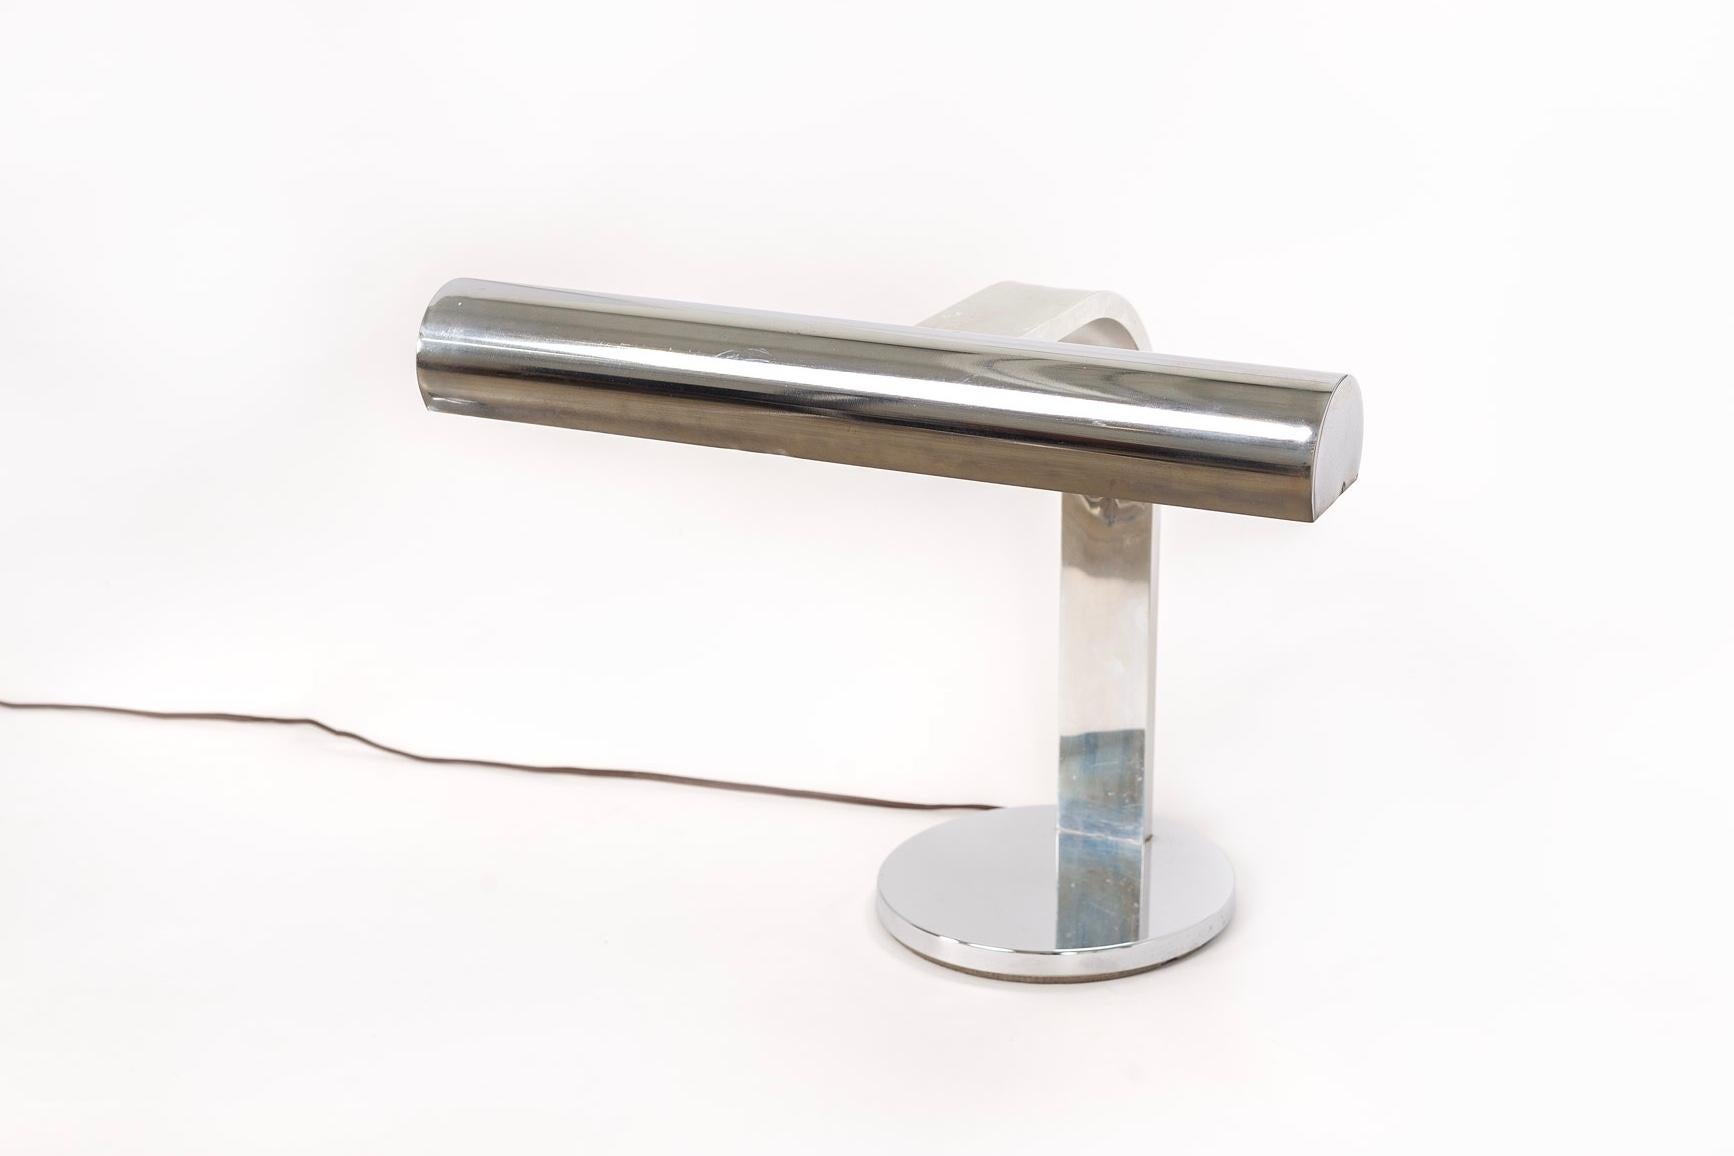 This unique vintage midcentury table lamp is circa 1970. The clean modernist design features a long cylindrical steel shade on an arcing flat bar arm with a heavy round base. Original felt bottom protects surfaces.